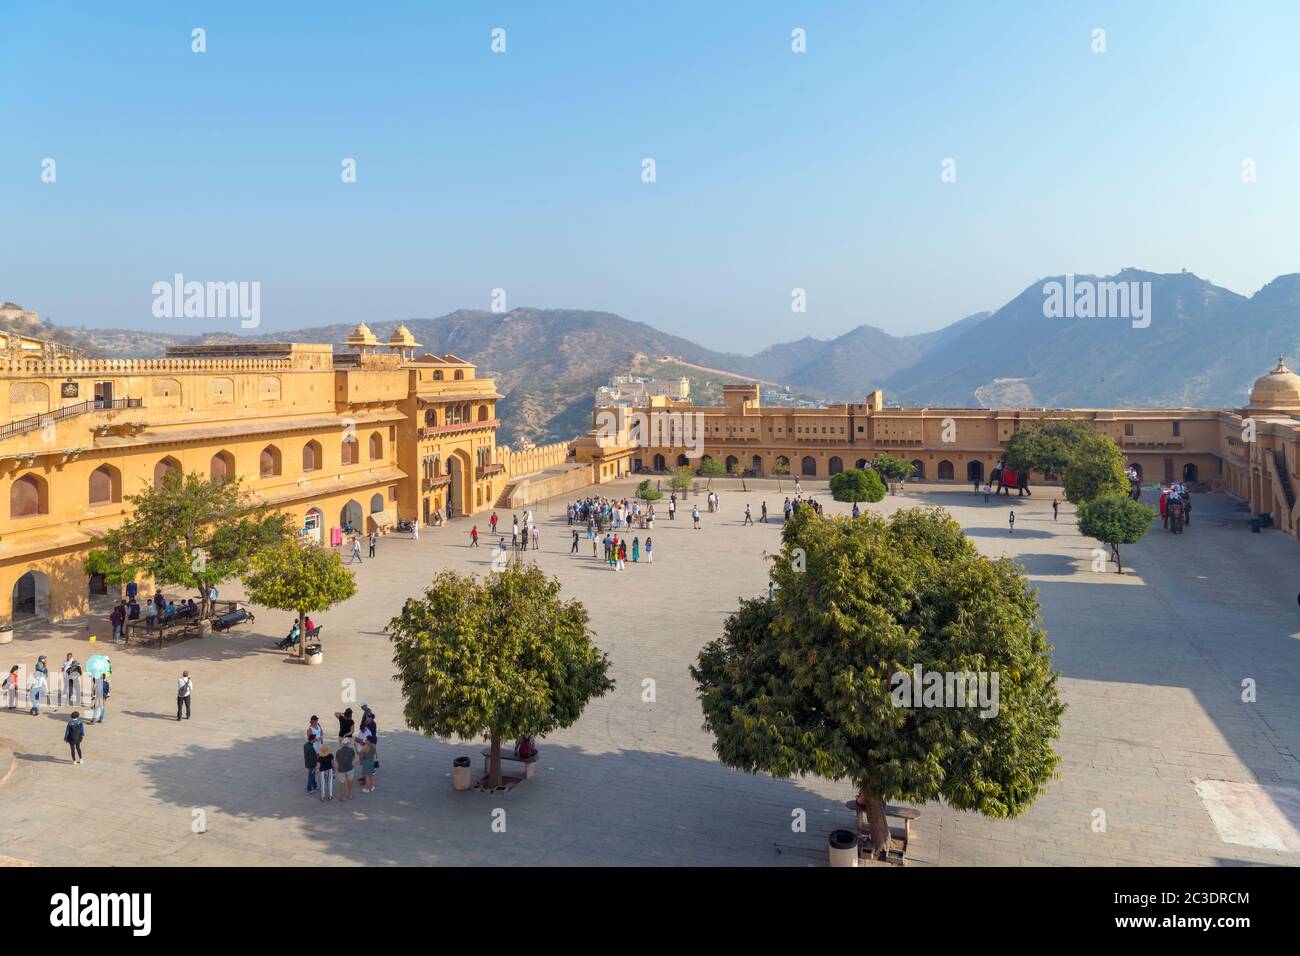 View over the Jaleb Chowk (Main Courtyard), Amber Fort, Jaipur, Rajasthan, India Stock Photo